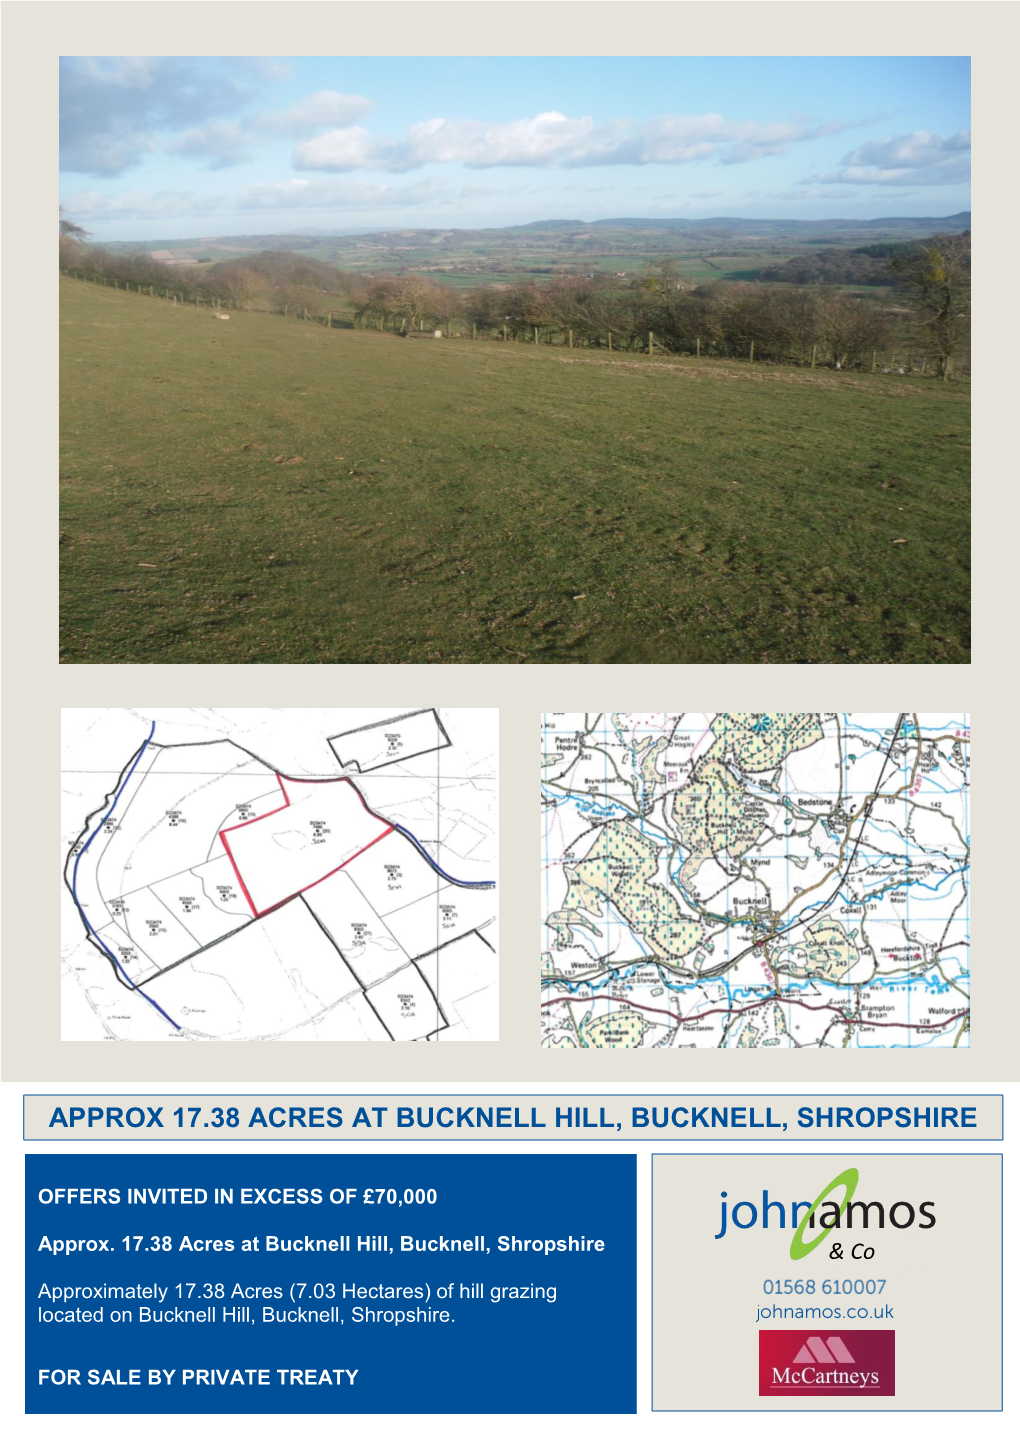 Approx 17.38 Acres at Bucknell Hill, Bucknell, Shropshire